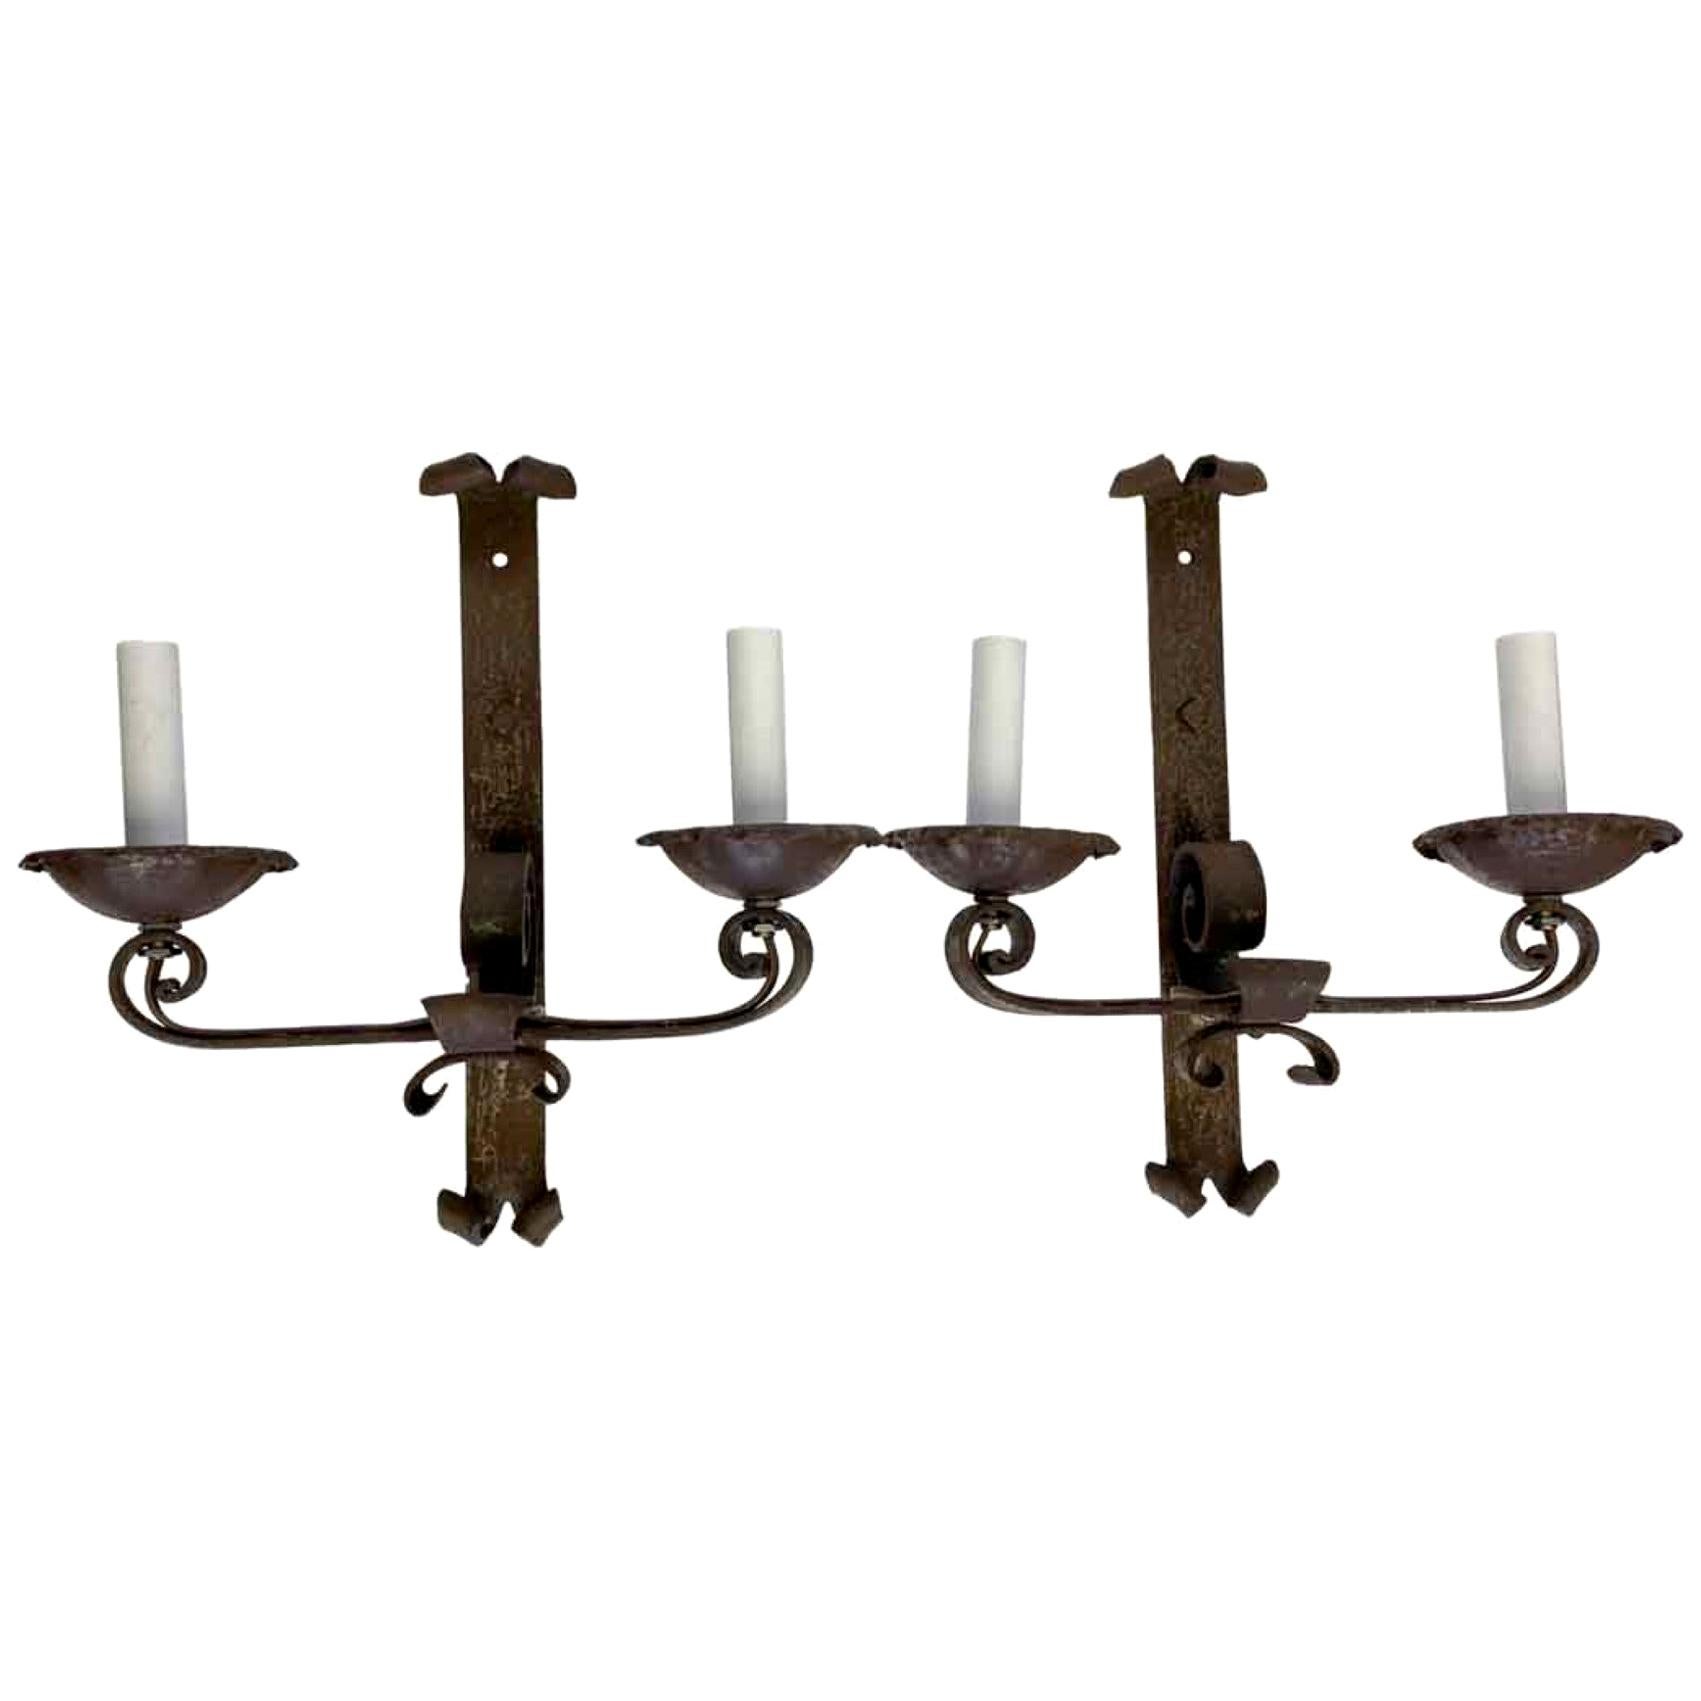 1890s Pair of Handwrought Iron 2-Arm Wall Sconces from France with Scrollwork